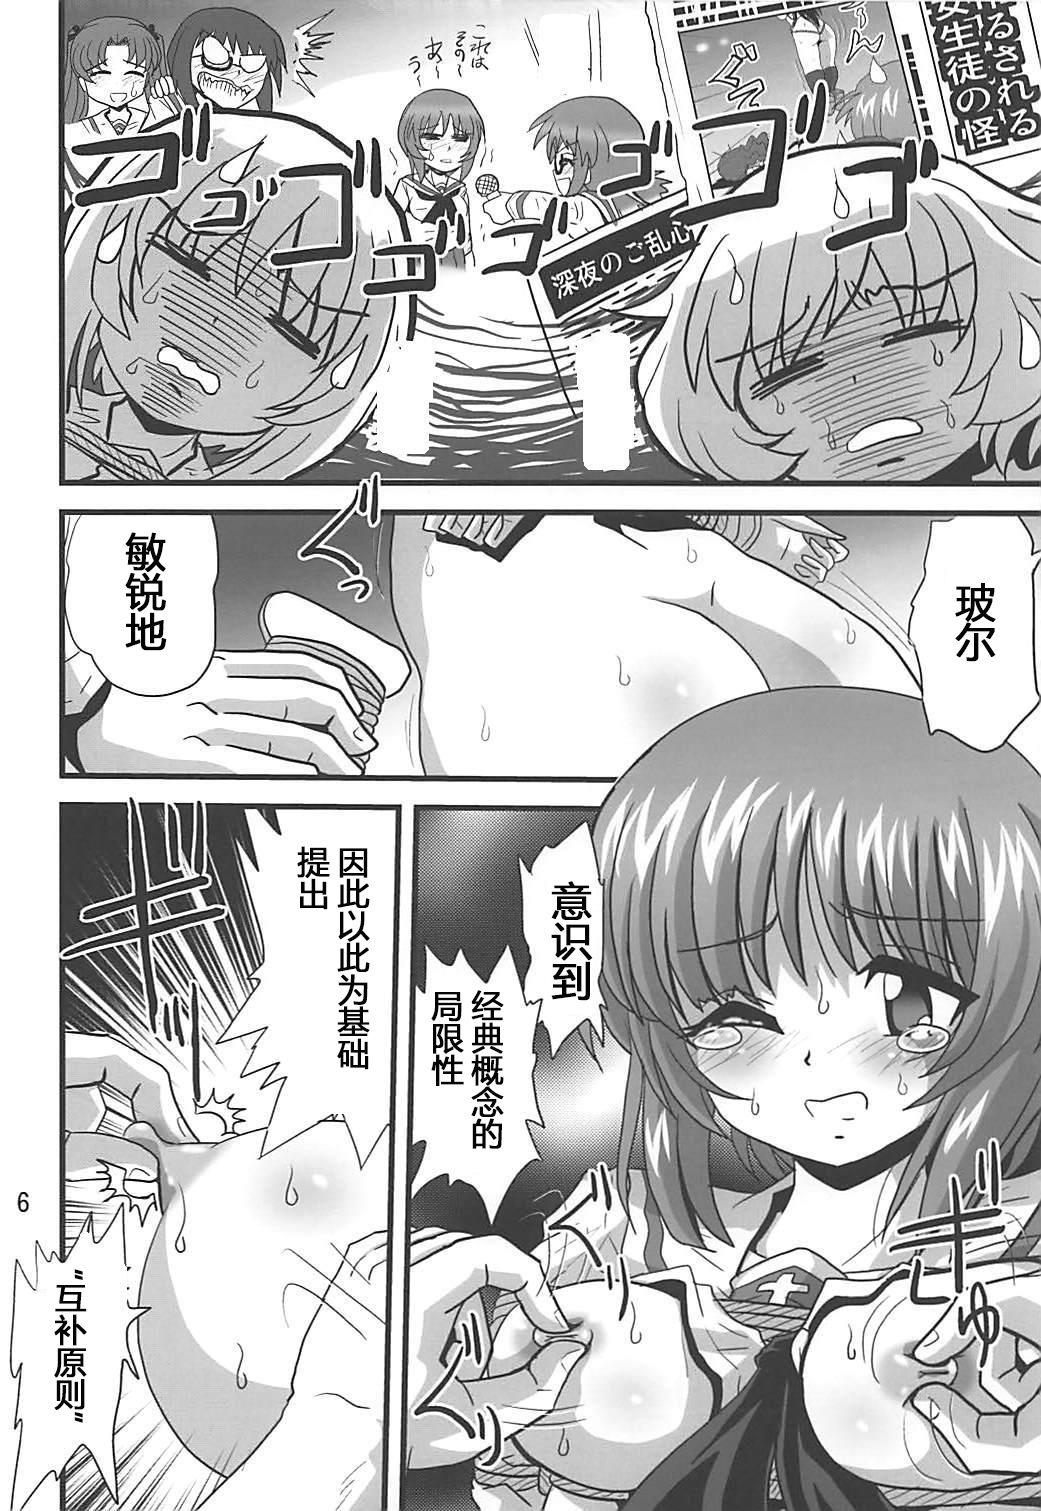 Pussy Lick 量子论21 - Girls und panzer Climax - Page 5